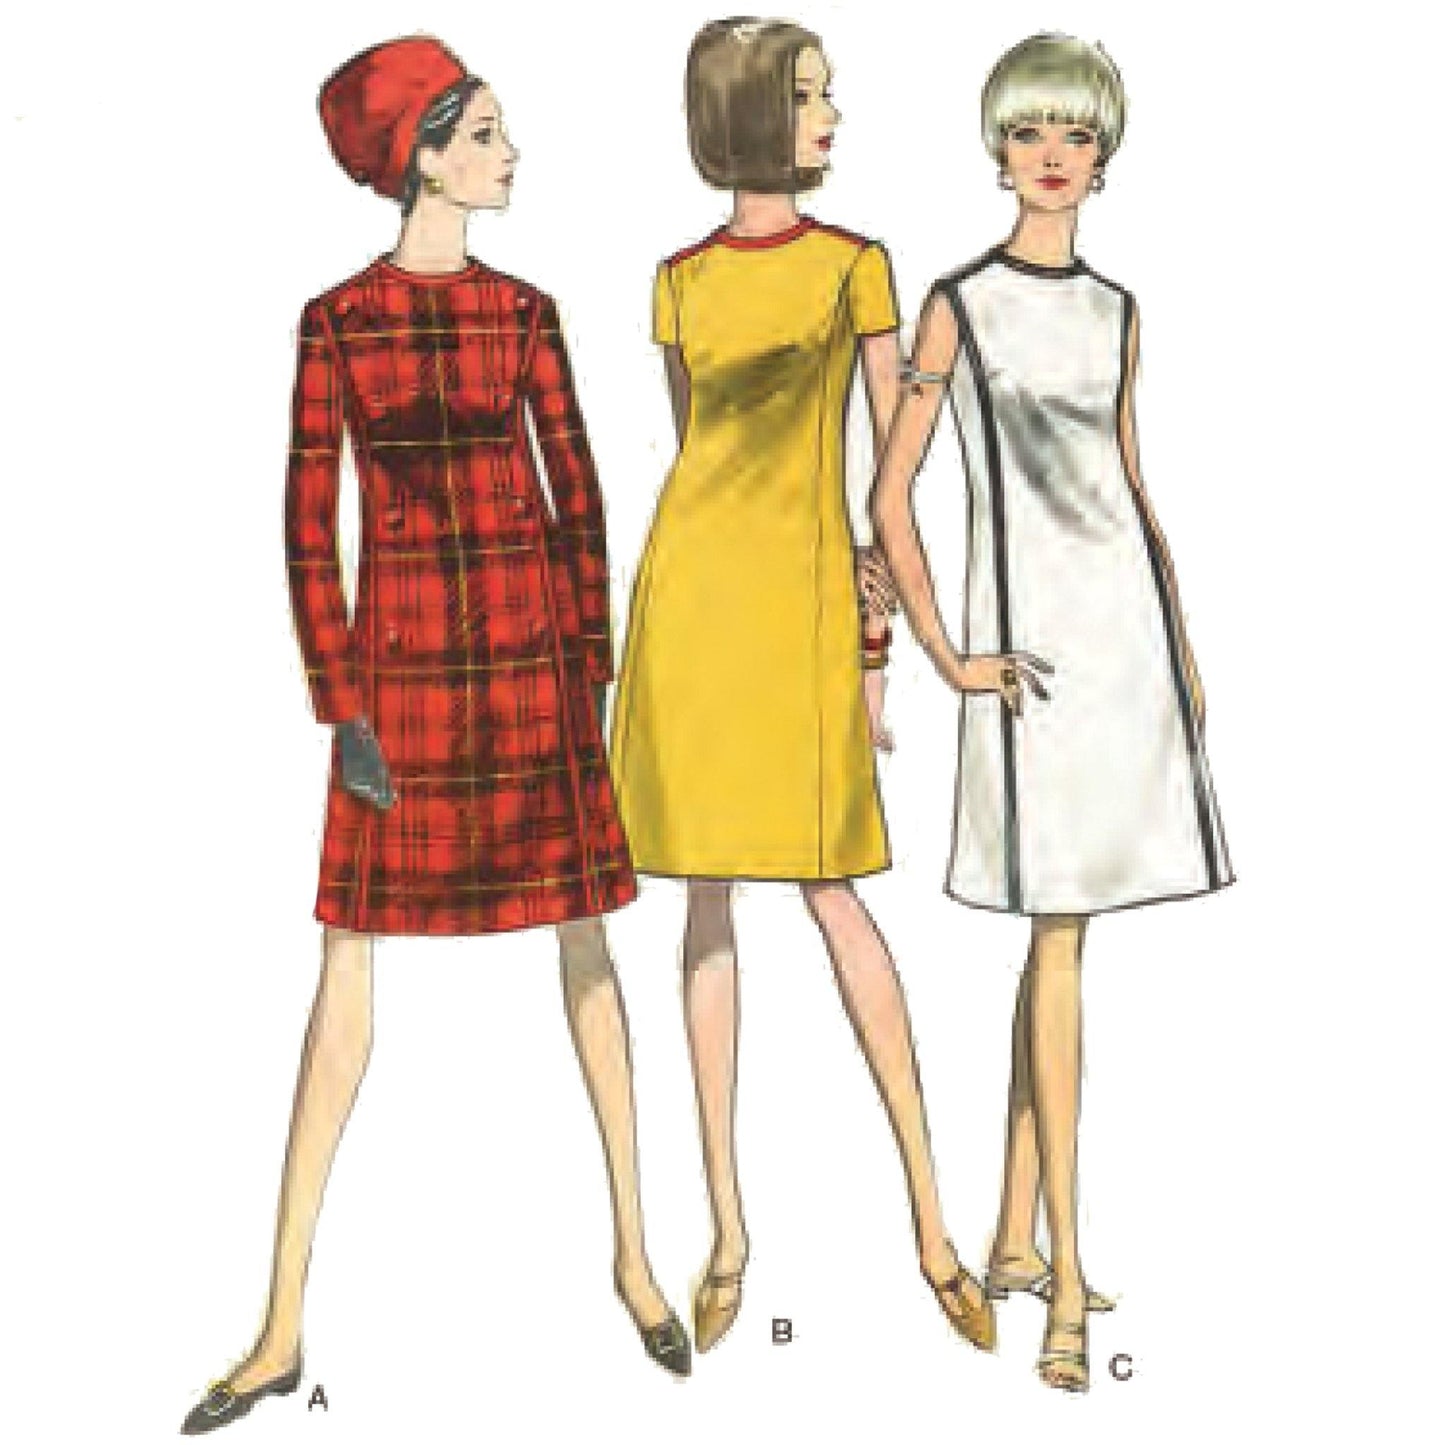 3 women wearing A-Line Mod style dresses. Left to right: Style A: Long sleeved, red tartan. Style B: Short sleeve, yellow with red neck binding. Style C: Sleeveless with black seam piping and neck binding.